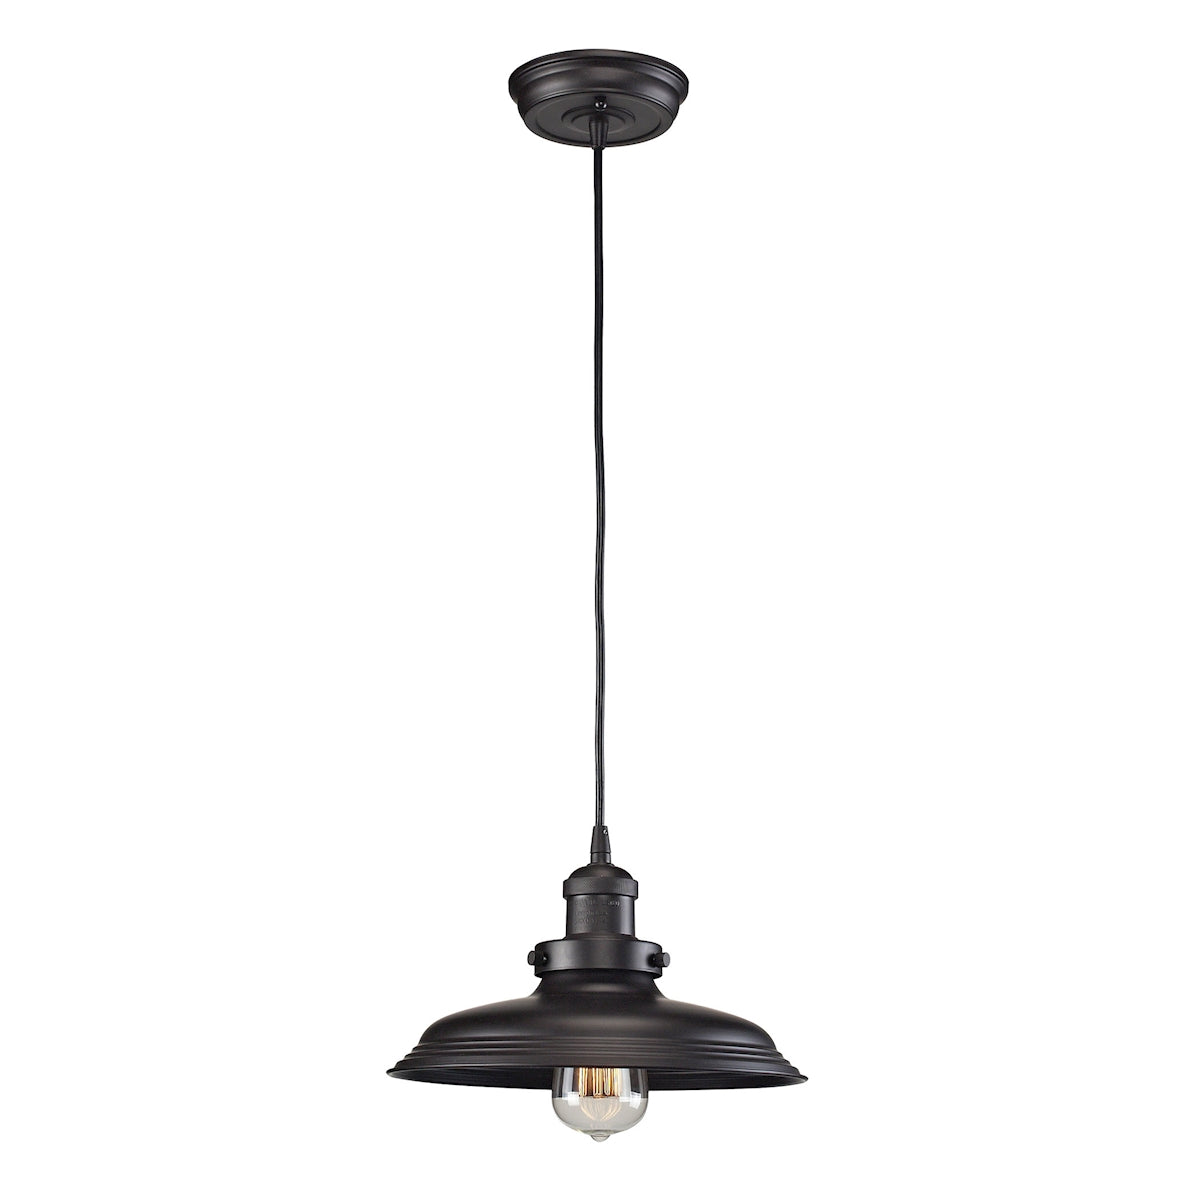 ELK Lighting 55041/1 Newberry 1-Light Mini Pendant in Oil Rubbed Bronze with Matching Shade